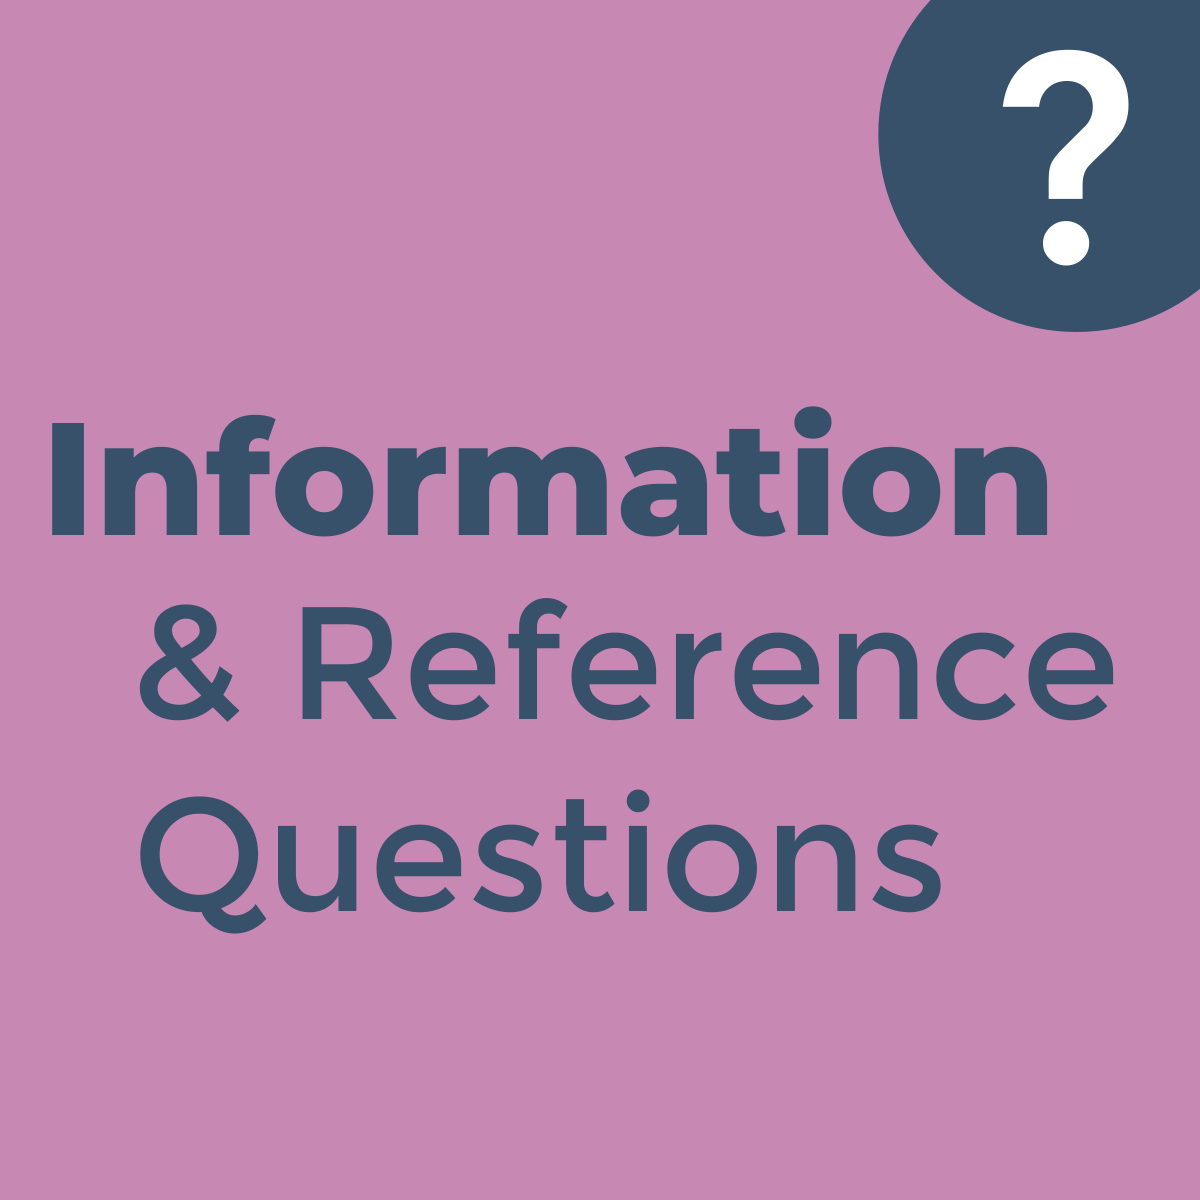 Information and Reference Questions